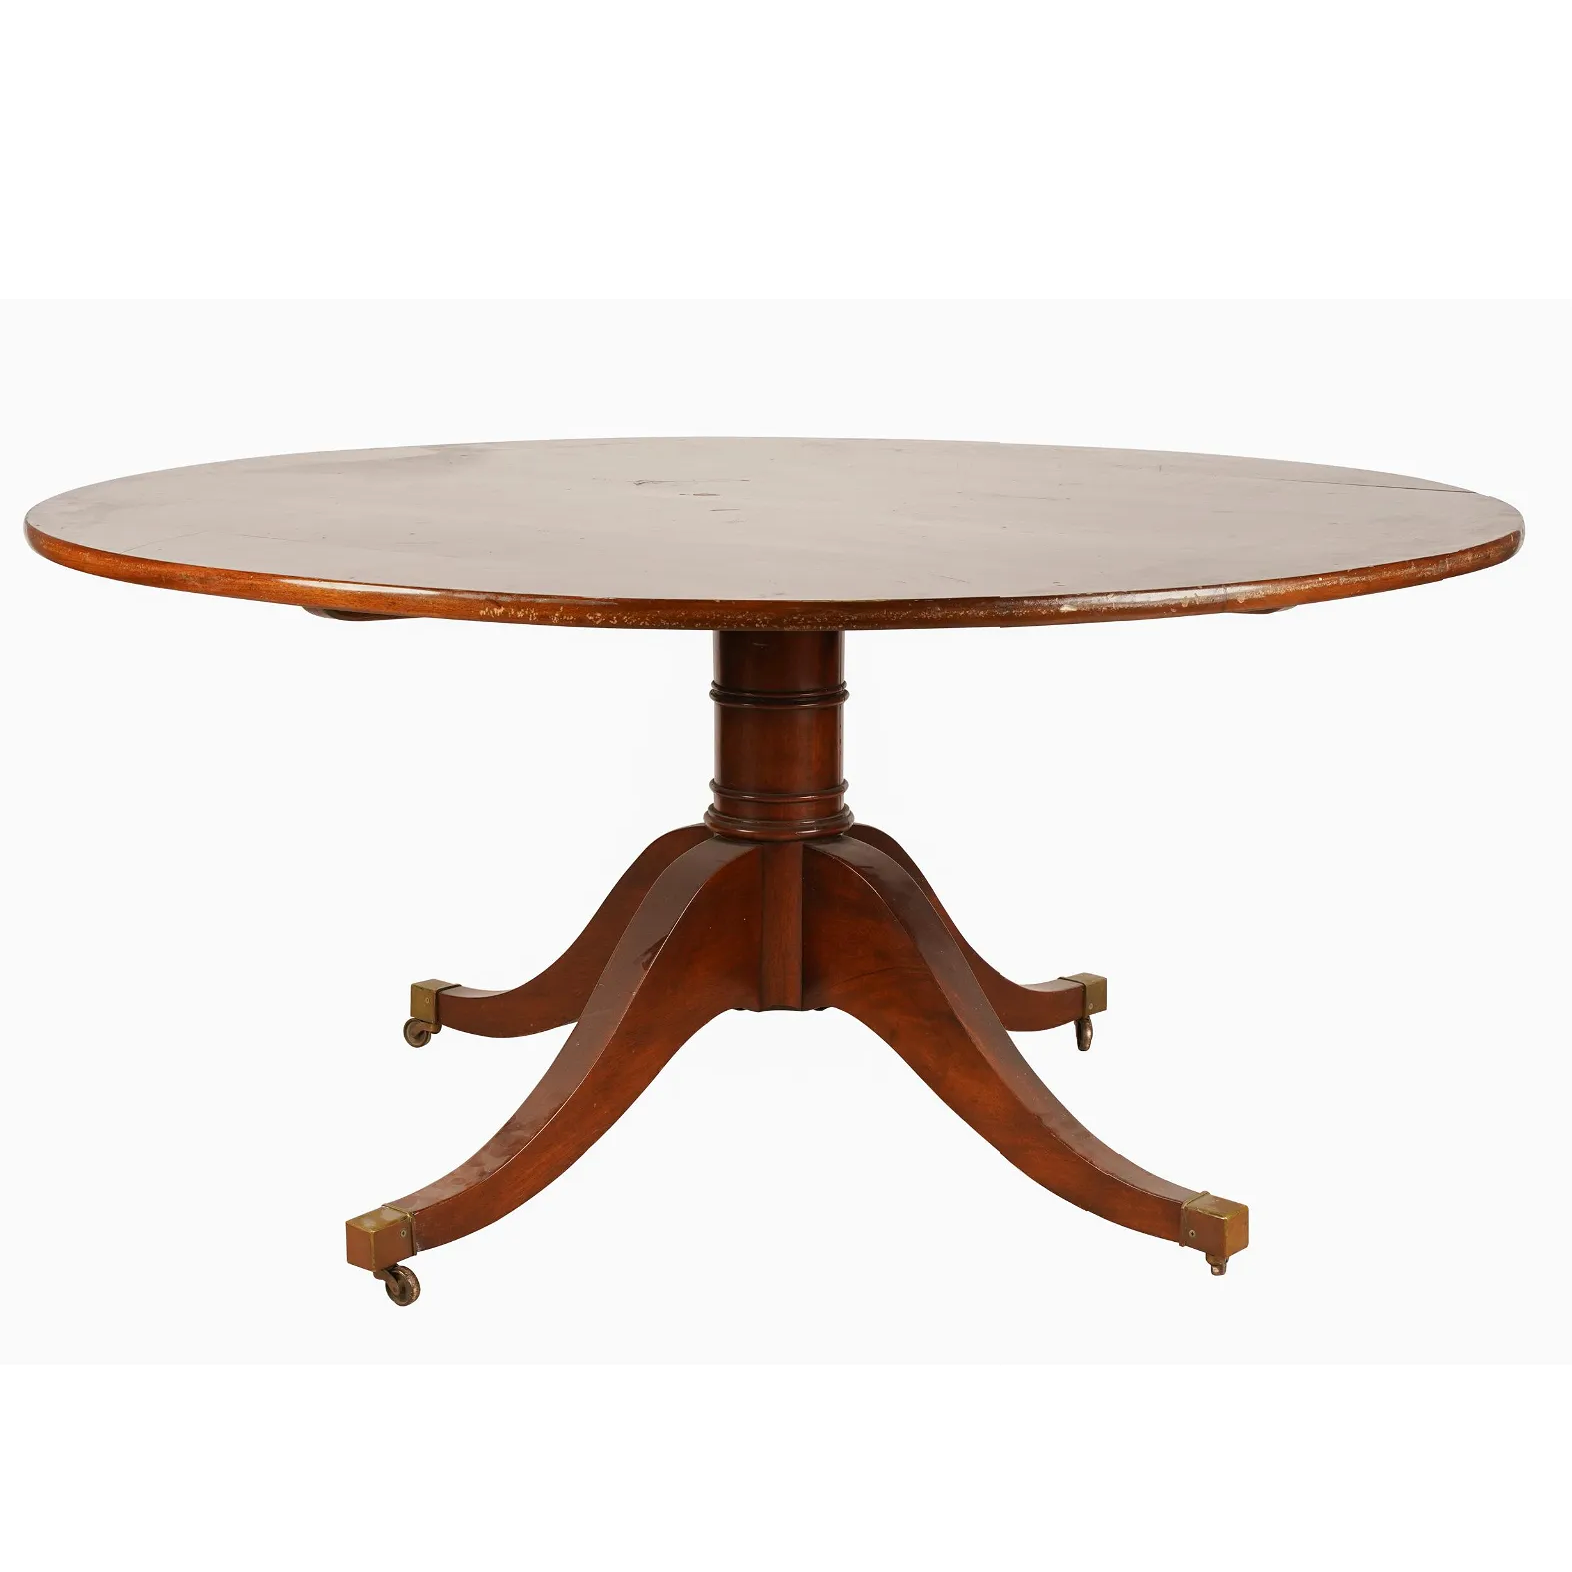 AF1-014:  EARLY 20th CENTURY ENGLISH REGENCY STYLE MAHOGANY 60" DIAMETER DINING TABLE